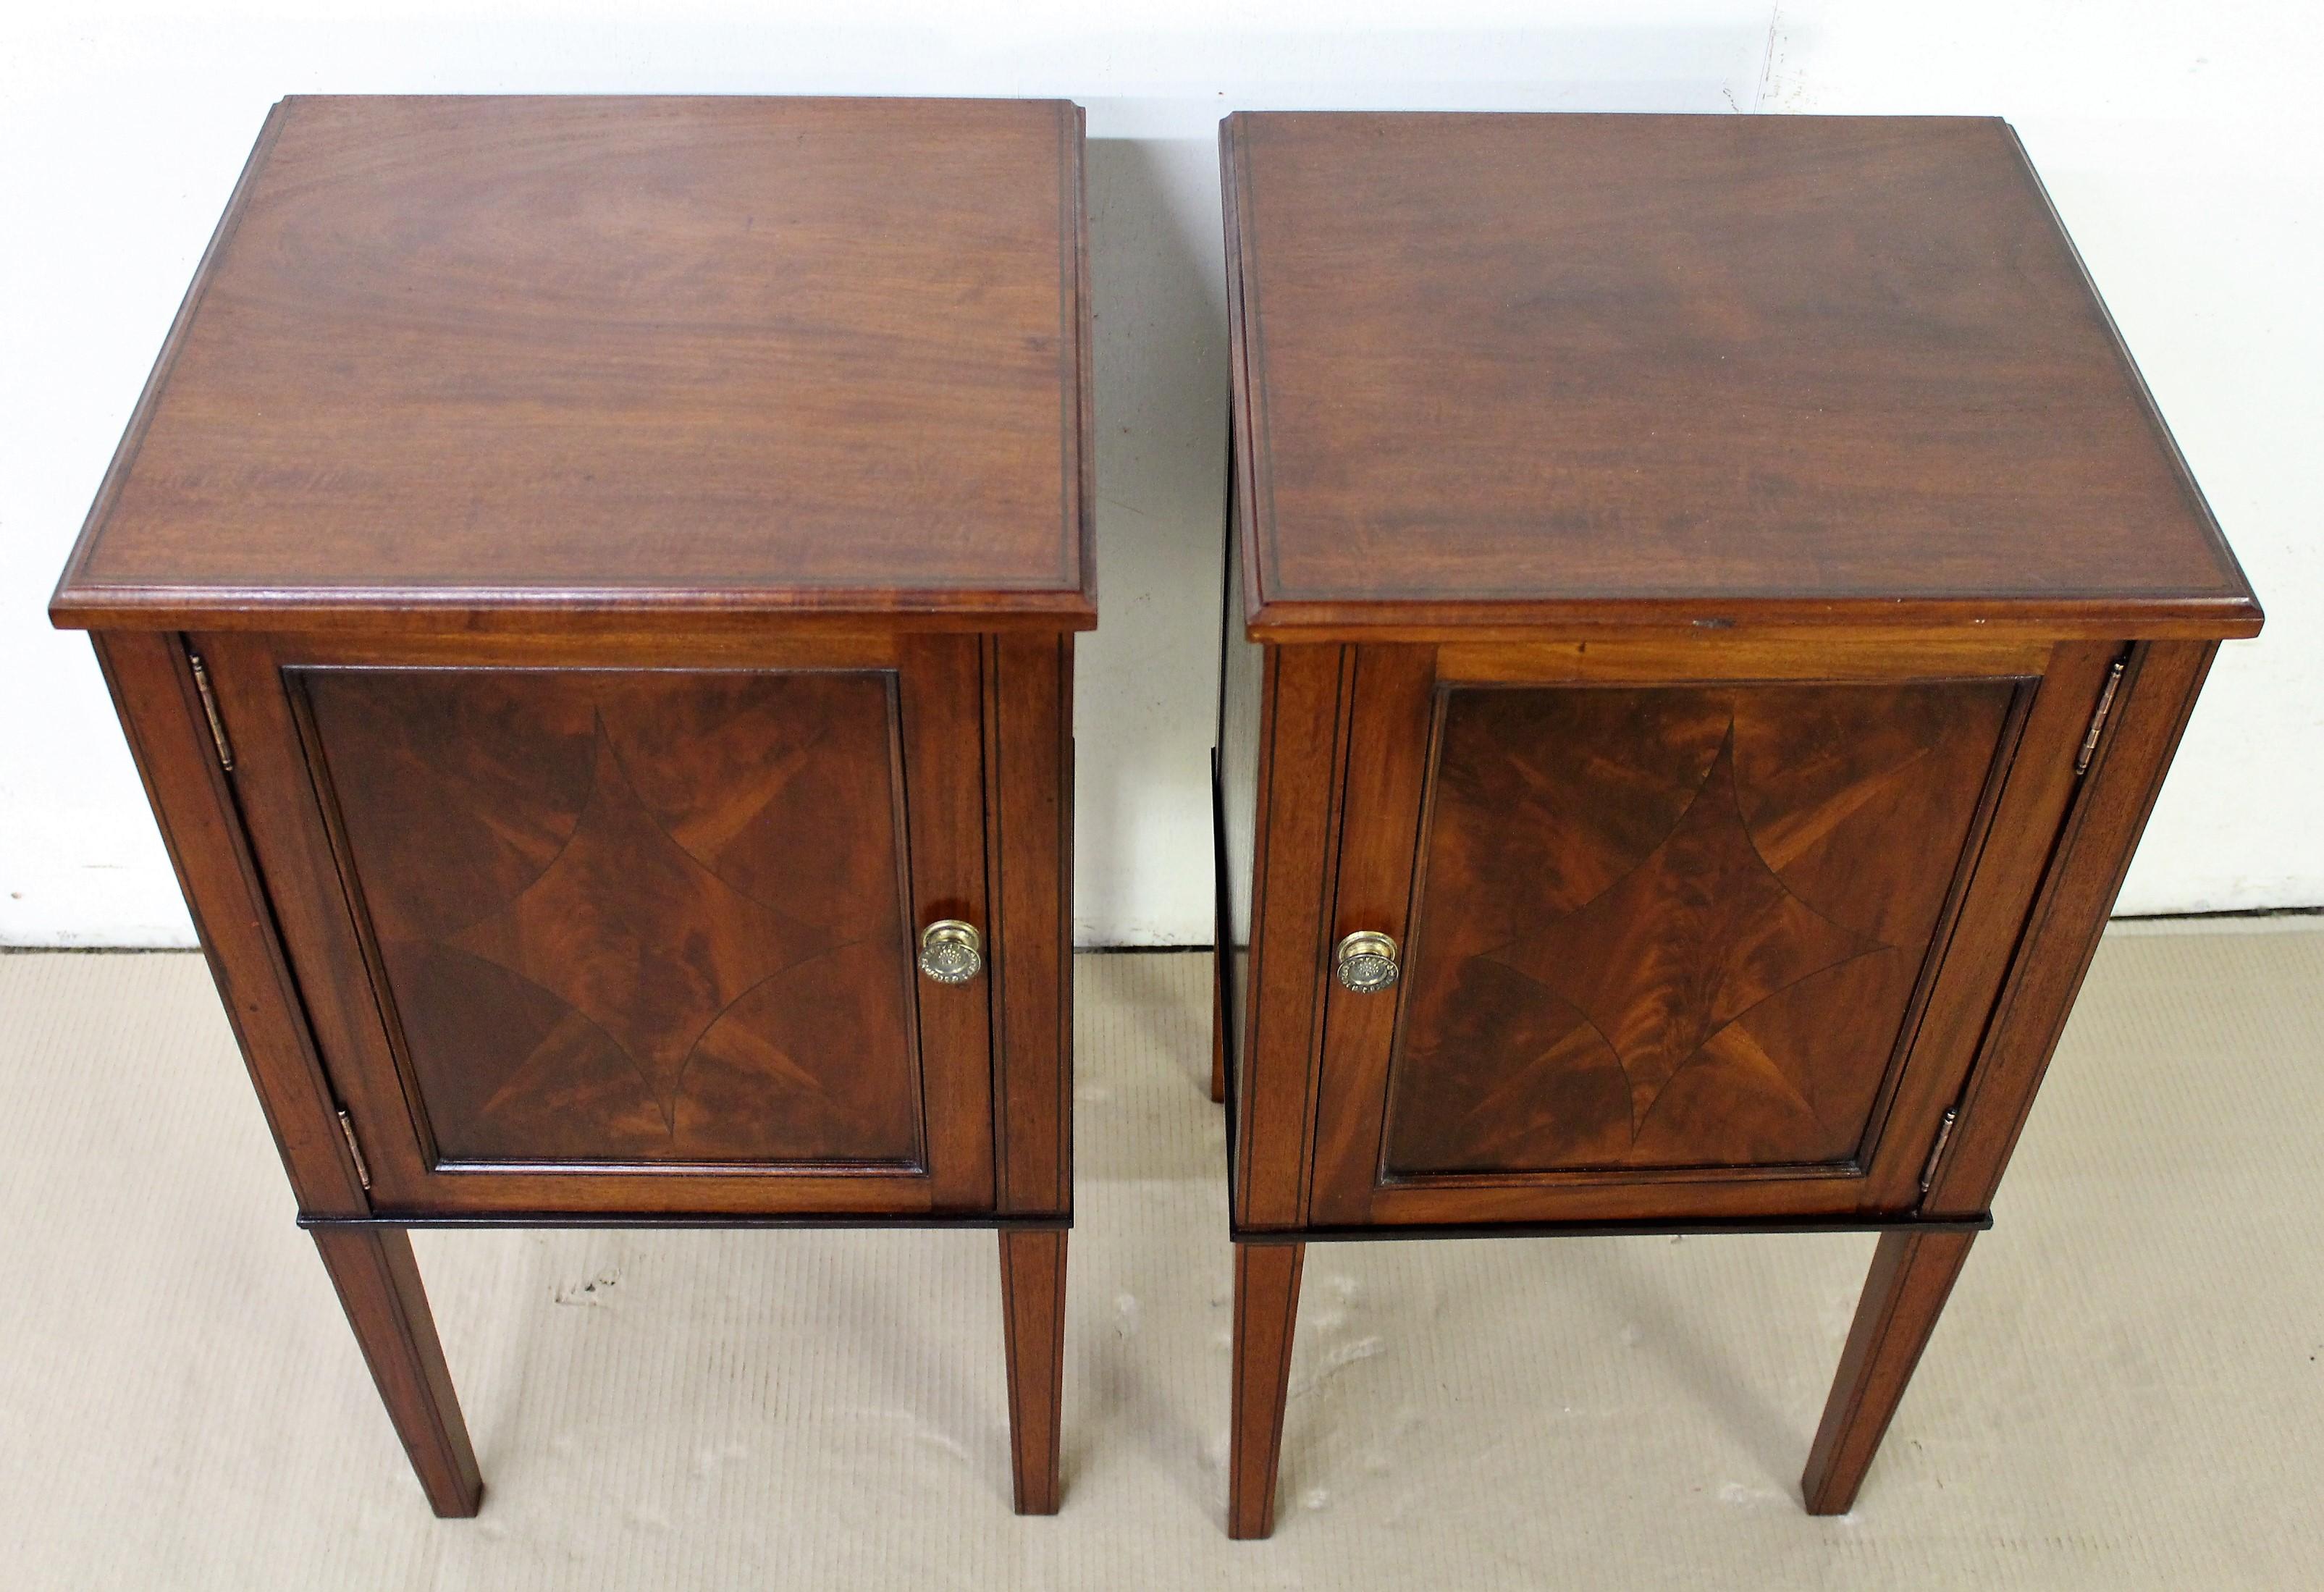 Early 20th Century Pair of Edwardian Inlaid Mahogany Bedside Cupboards